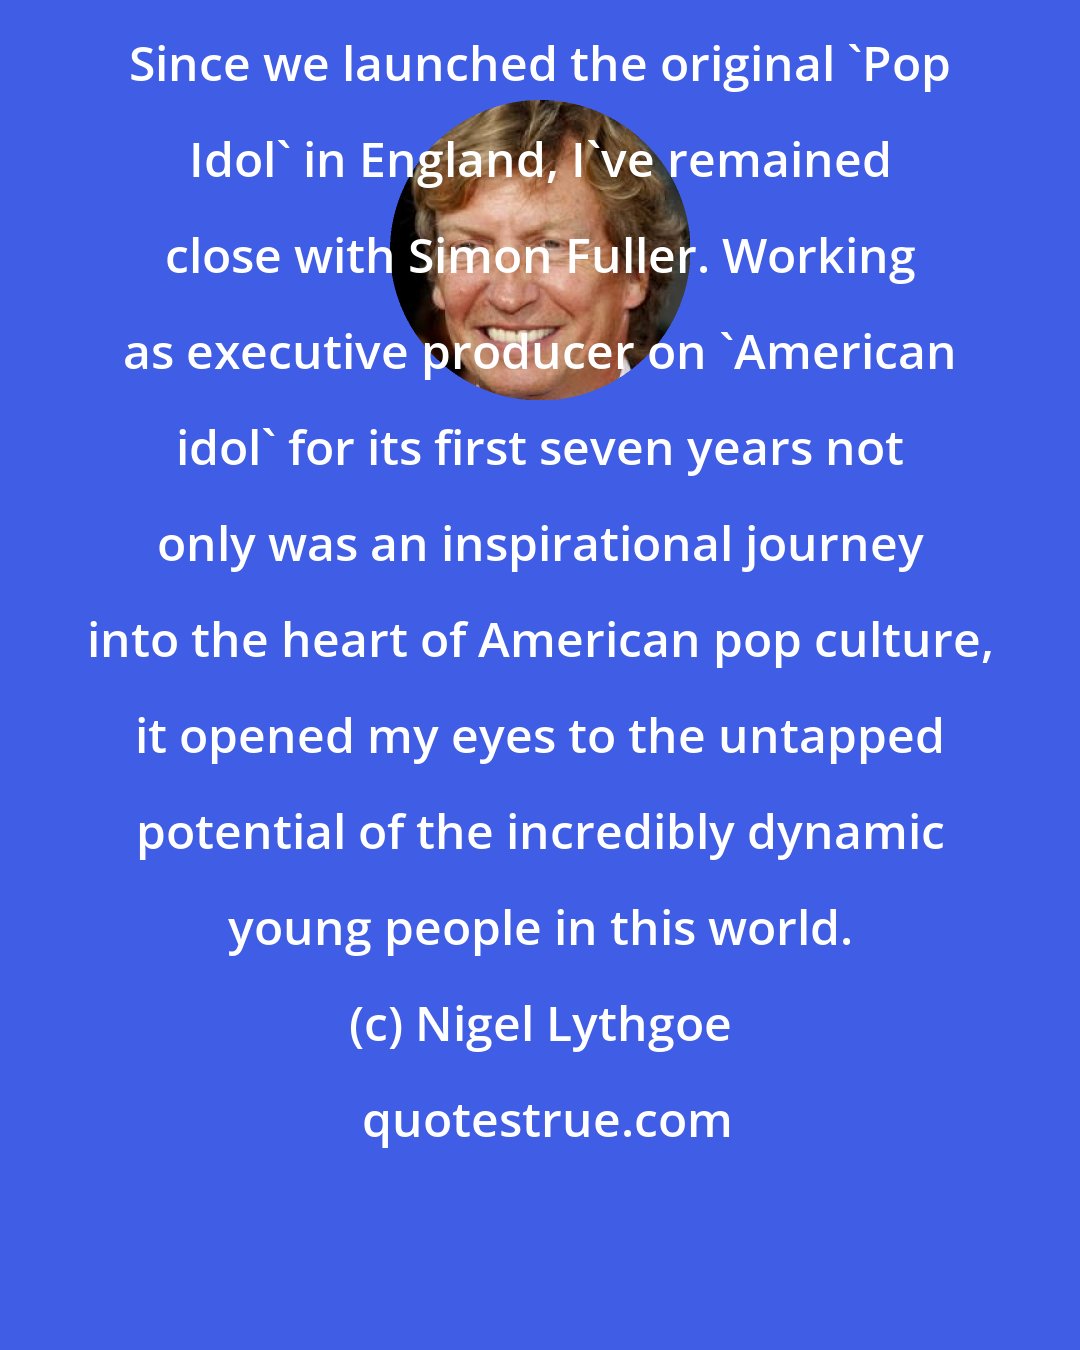 Nigel Lythgoe: Since we launched the original 'Pop Idol' in England, I've remained close with Simon Fuller. Working as executive producer on 'American idol' for its first seven years not only was an inspirational journey into the heart of American pop culture, it opened my eyes to the untapped potential of the incredibly dynamic young people in this world.